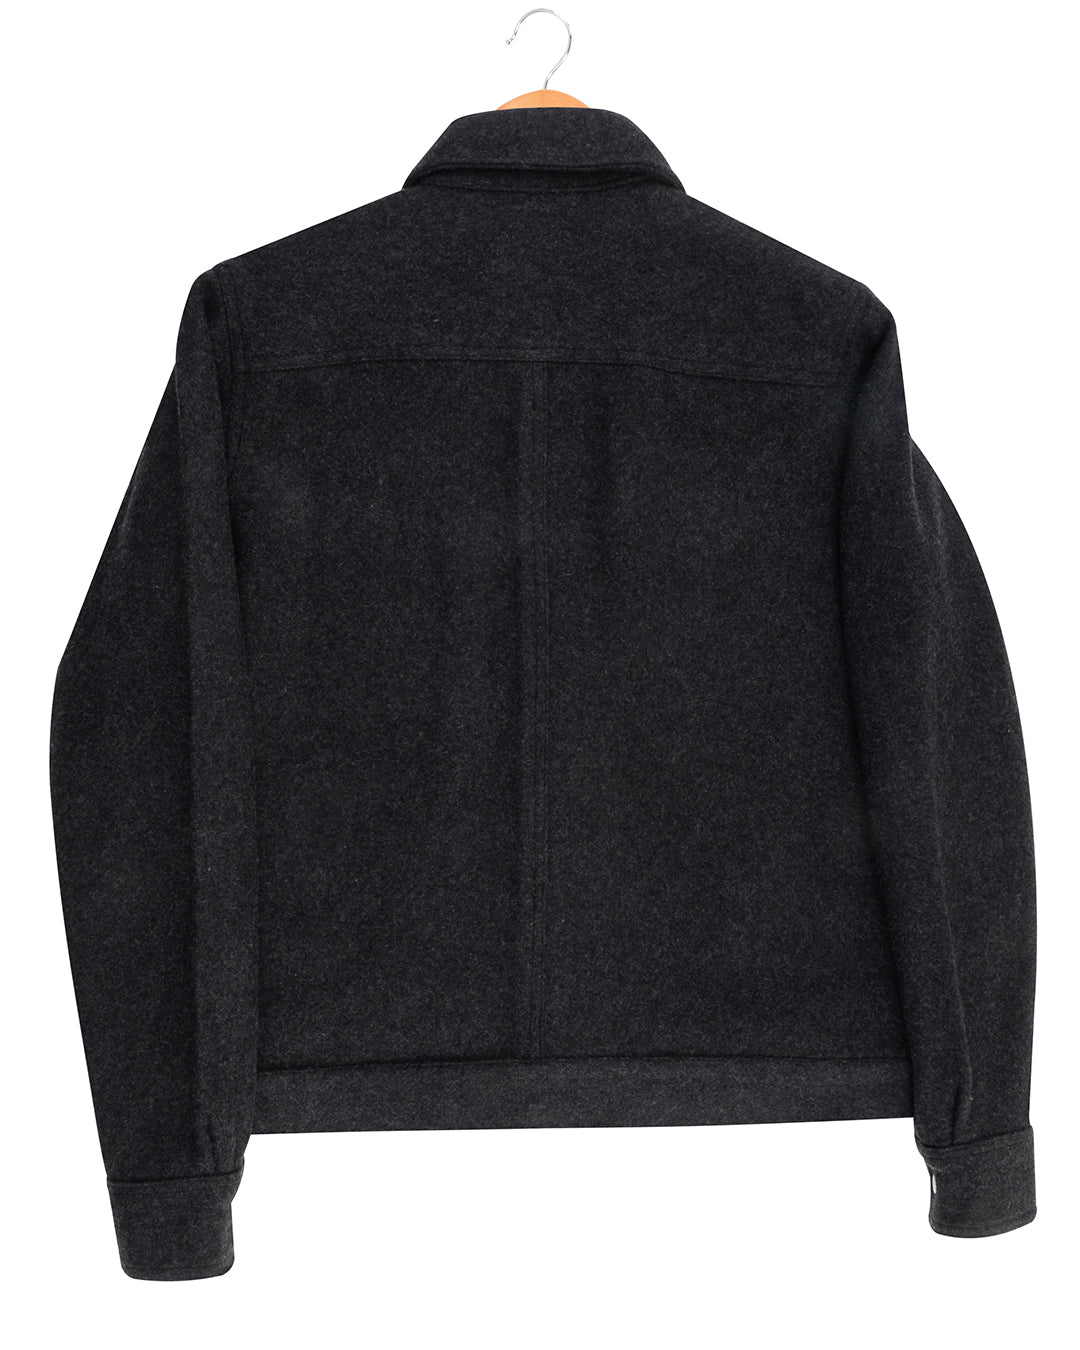 Back of the recycled wool shirt jacket for men by Luxire in charcoal grey